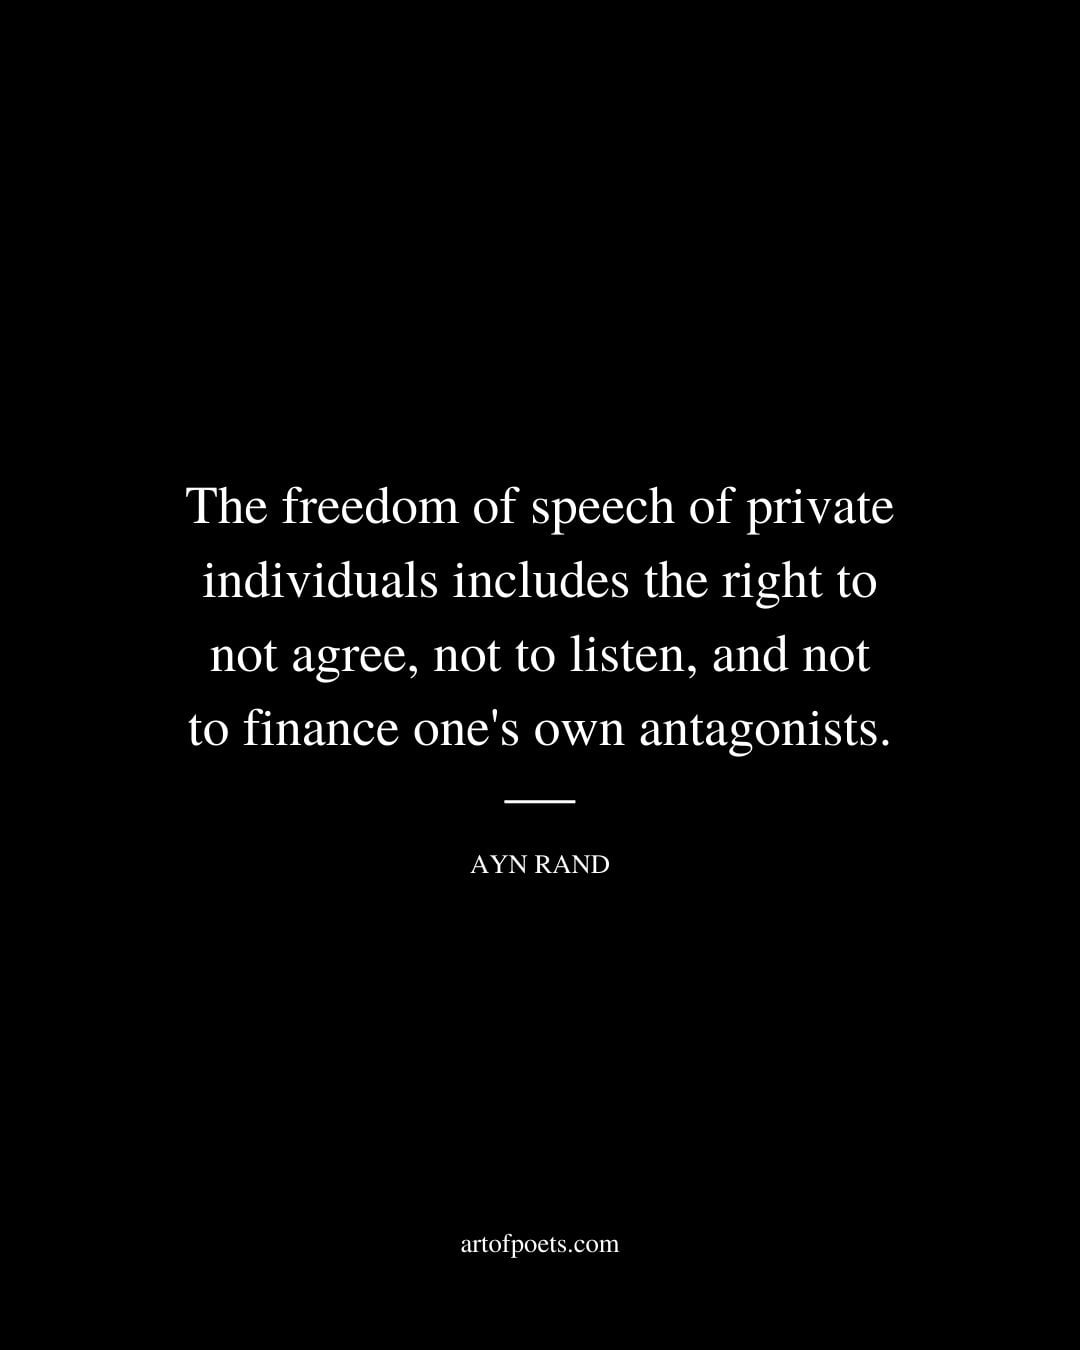 The freedom of speech of private individuals includes the right to not agree not to listen and not to finance ones own antagonists